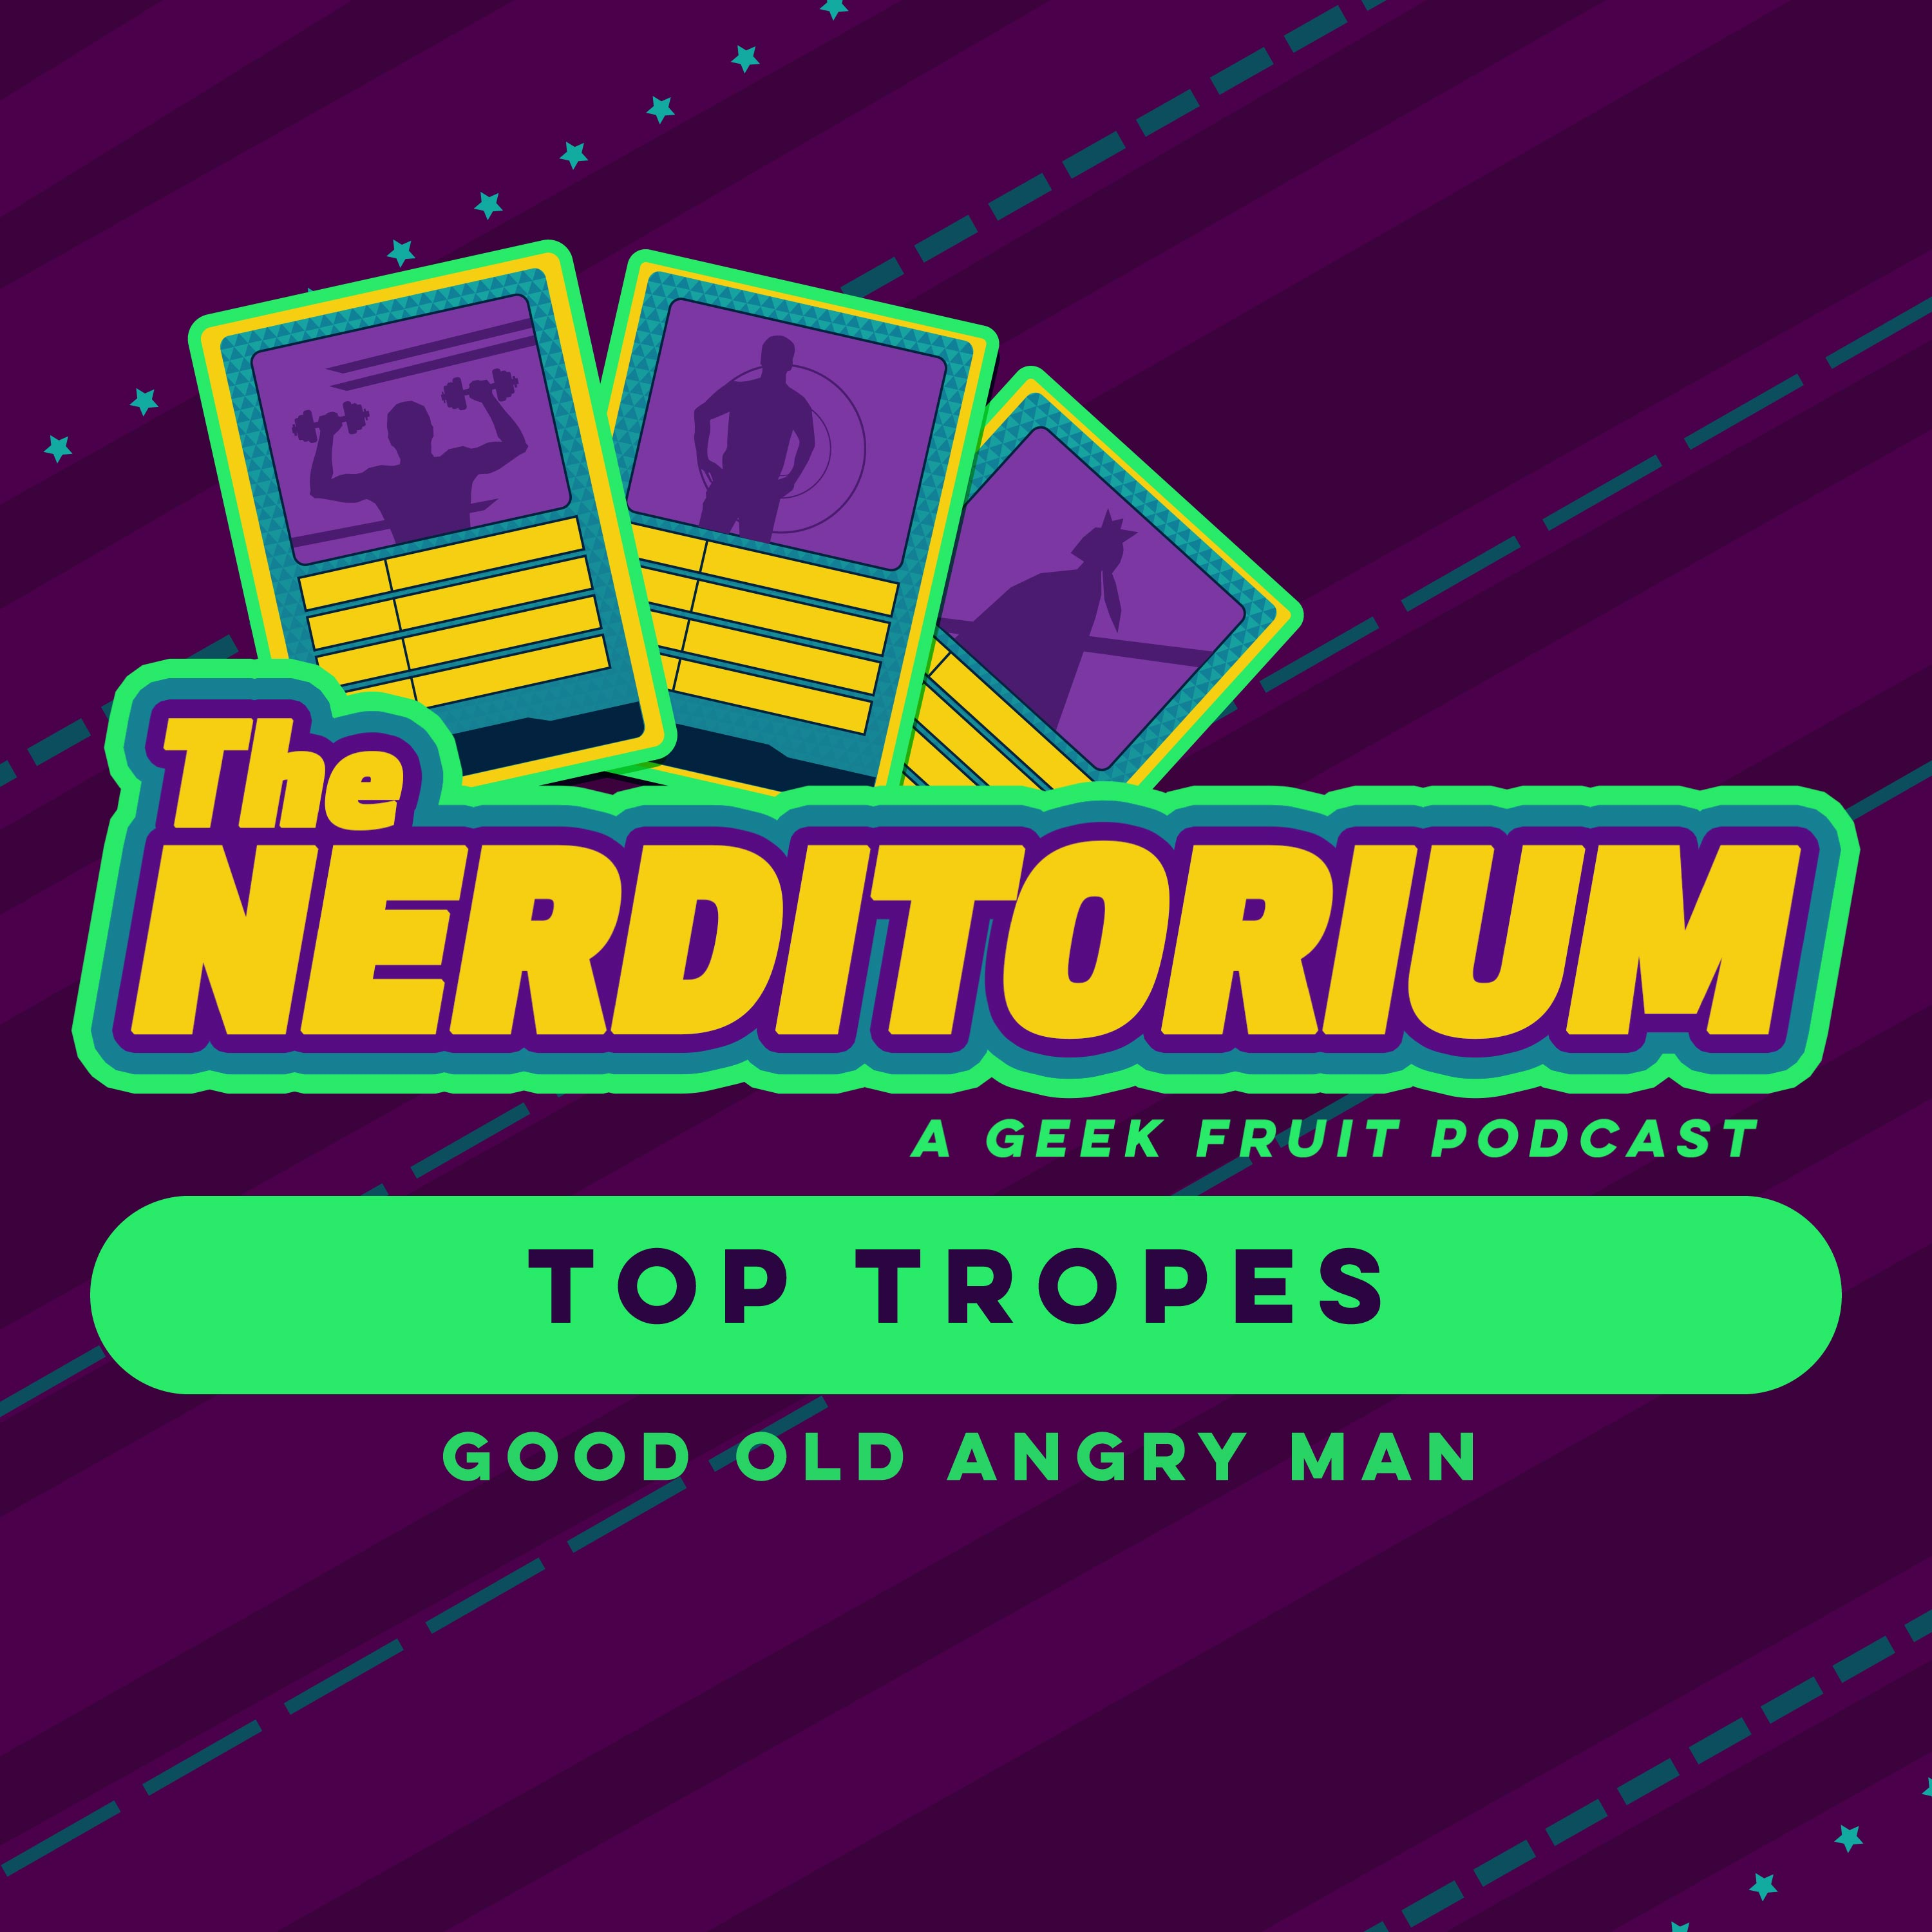 Top Tropes: Good Old Angry Man